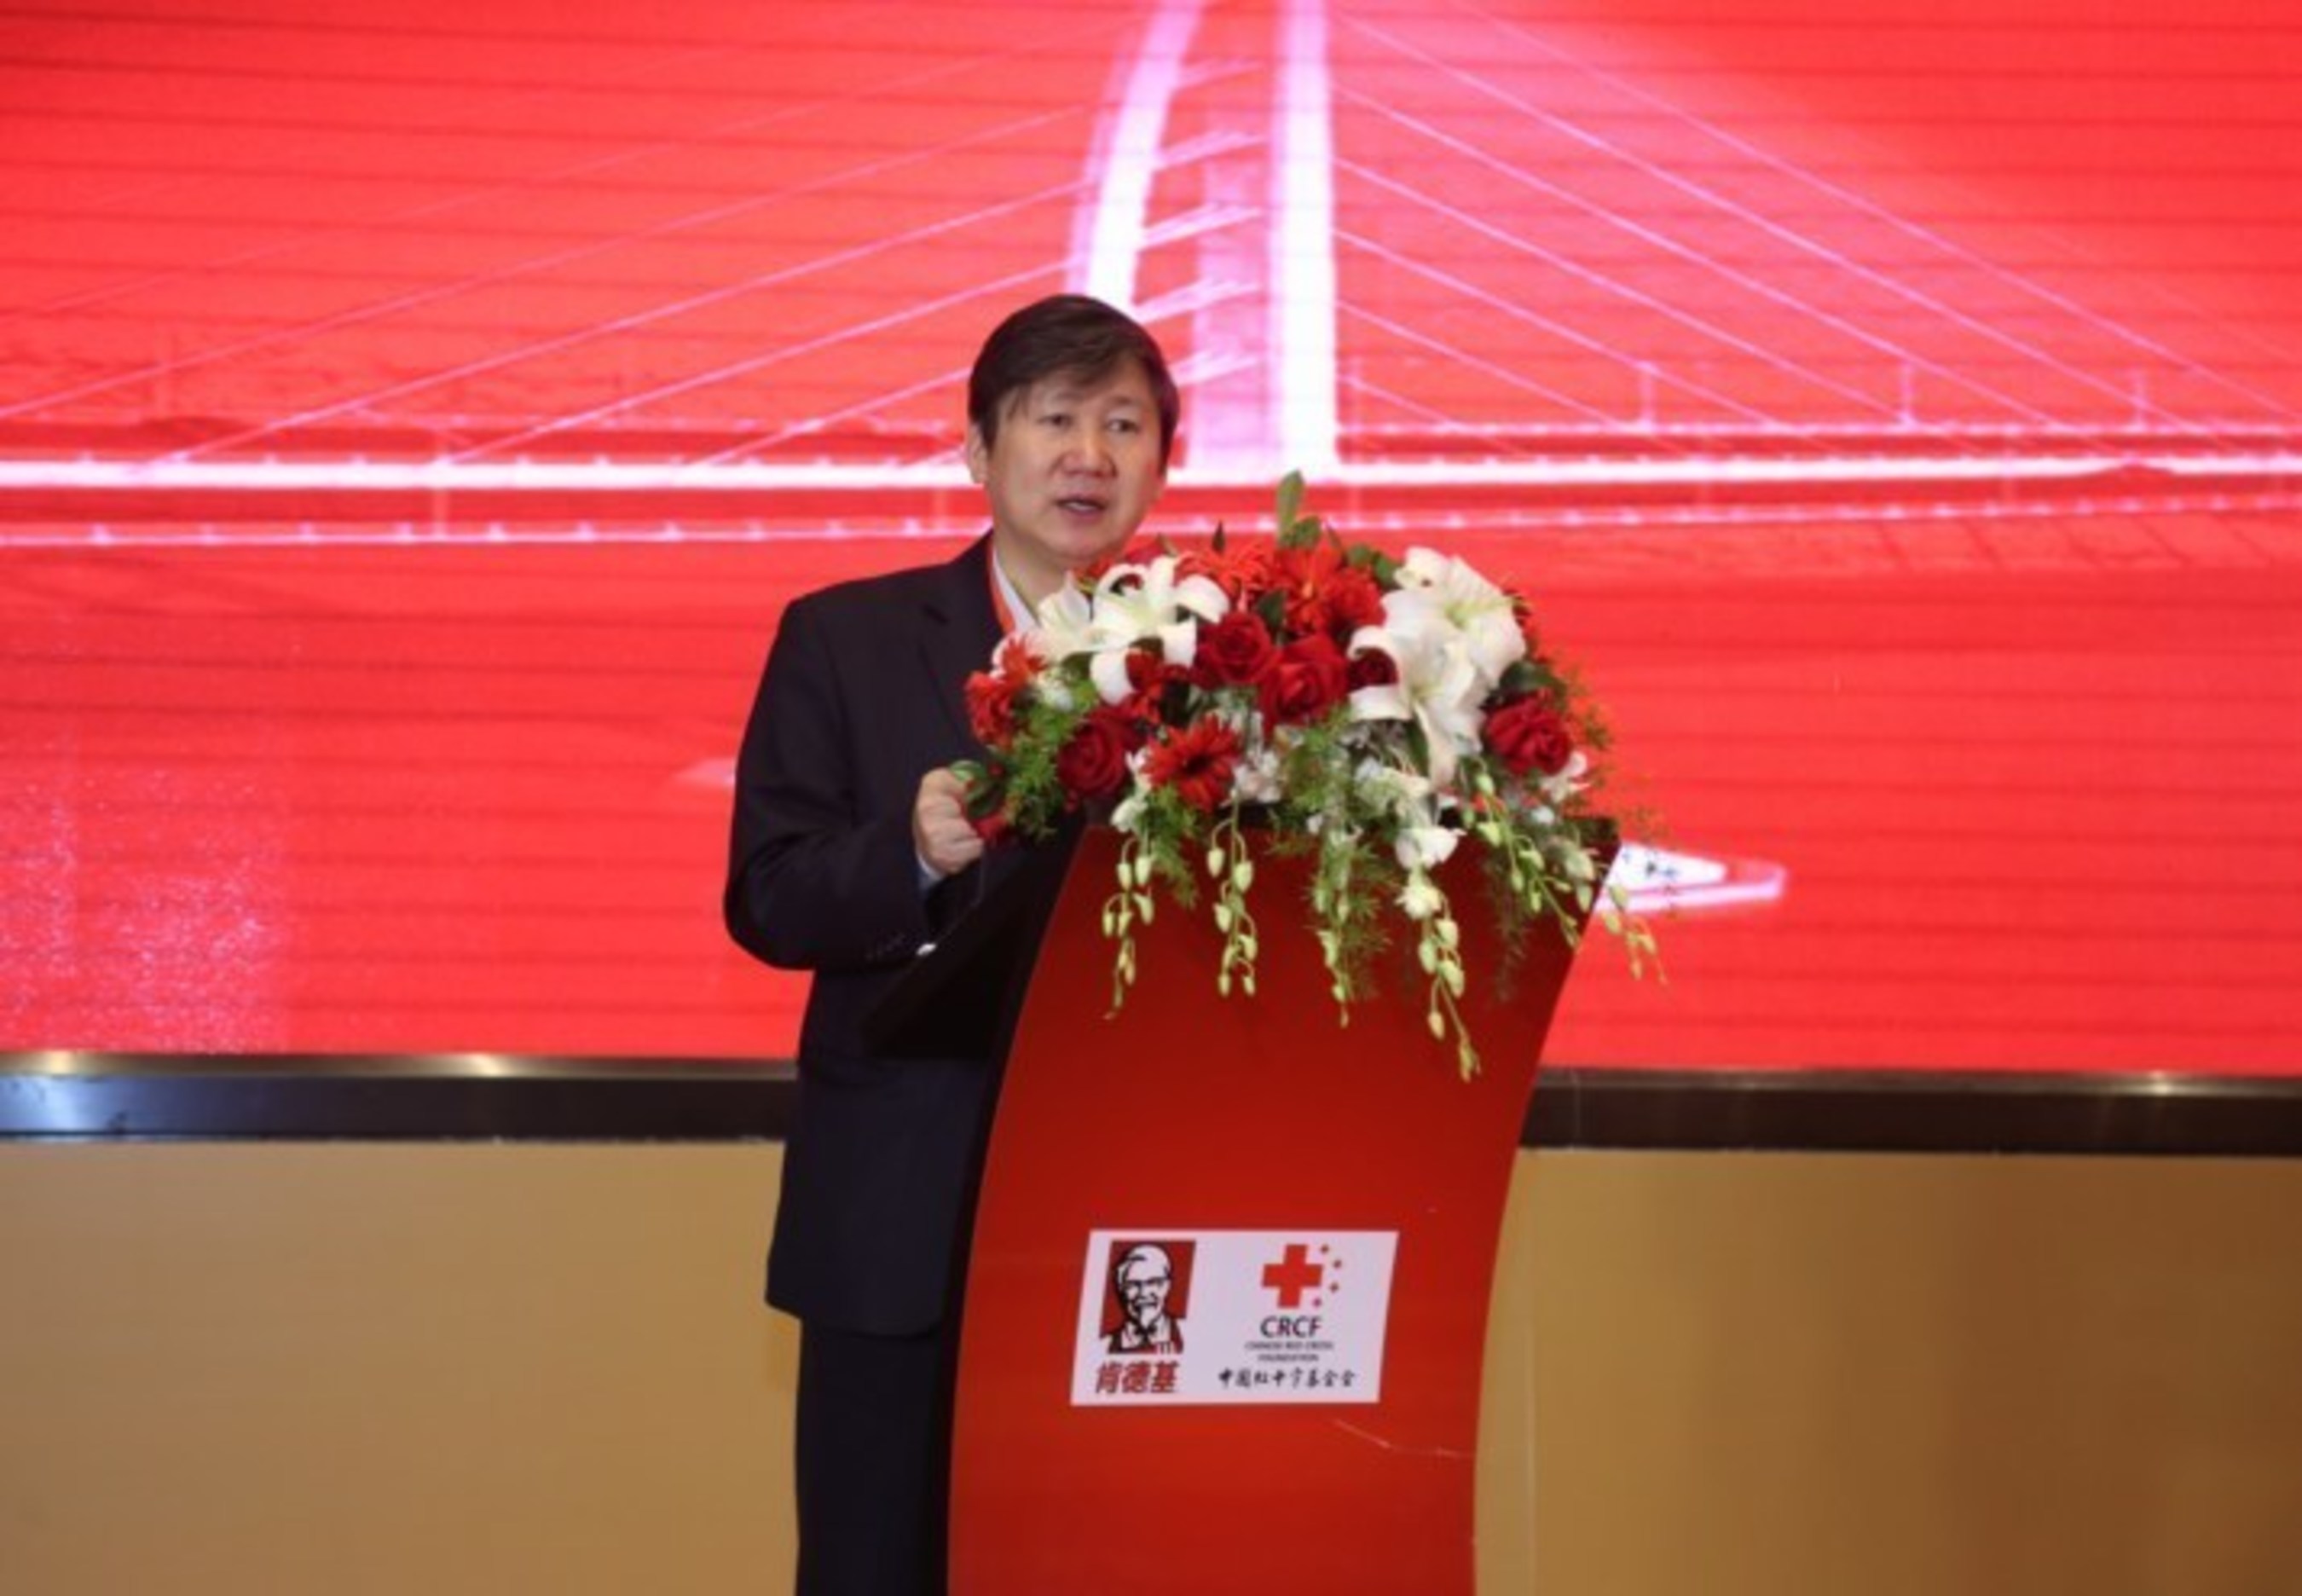 Liu Xuanguo, Vice General Secretary of CRCF, delivering speech